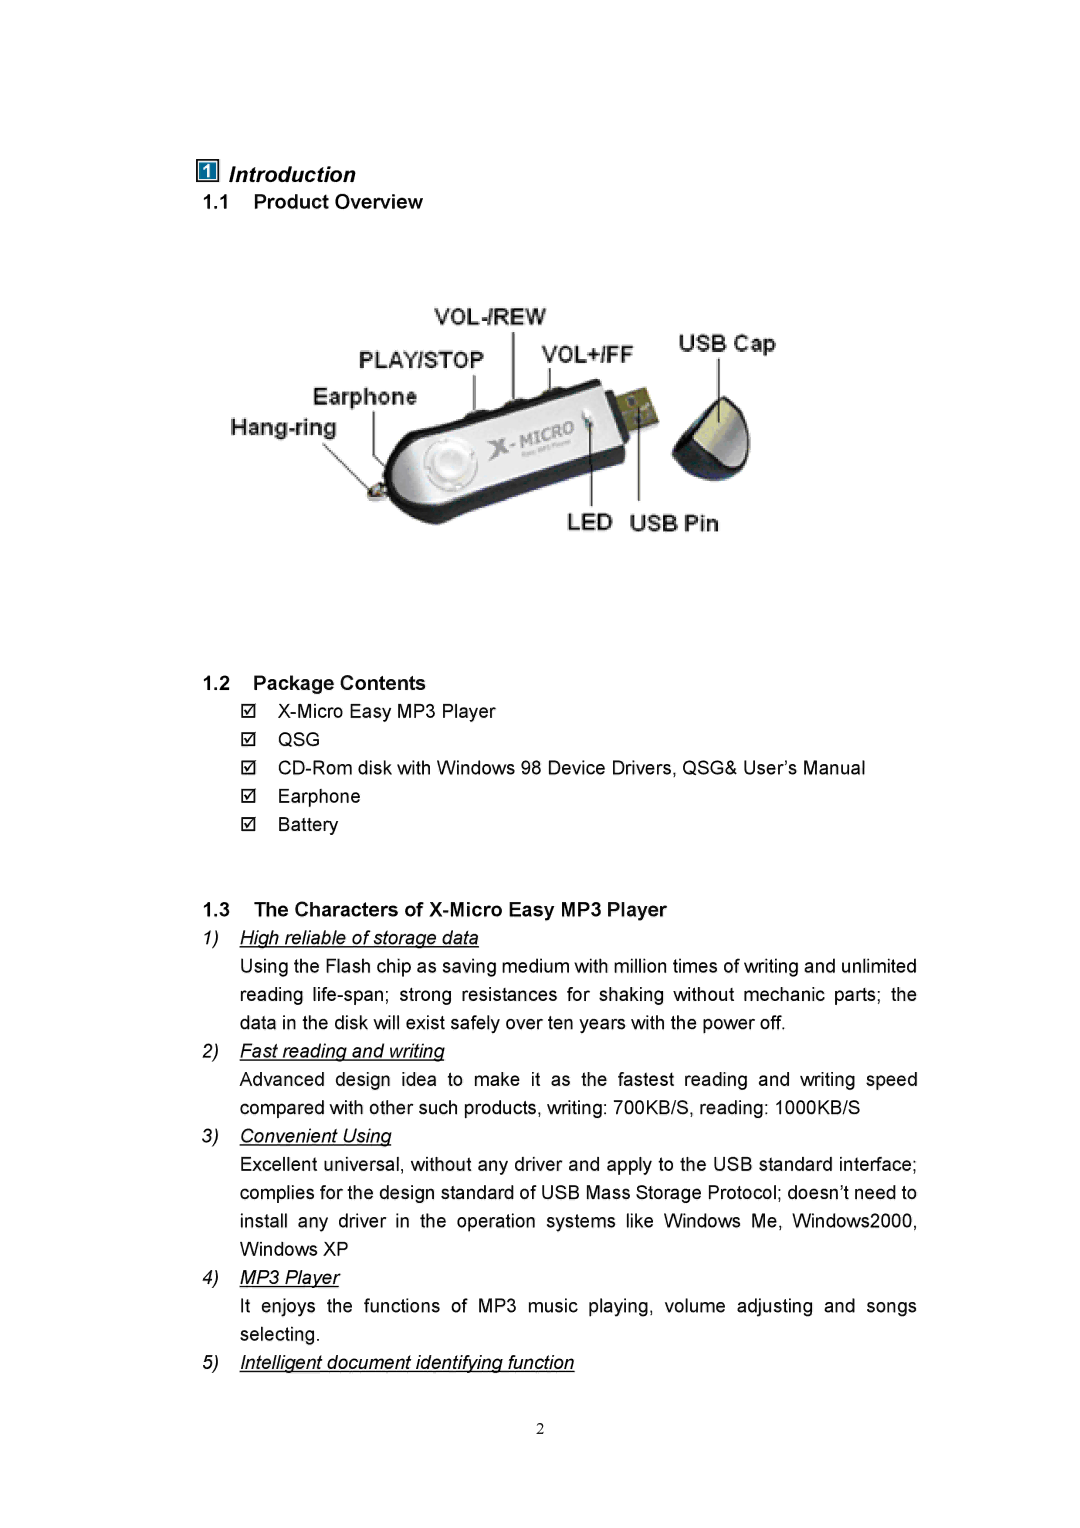 X-Micro Tech user manual Introduction, Product Overview Package Contents, Characters of X-Micro Easy MP3 Player 